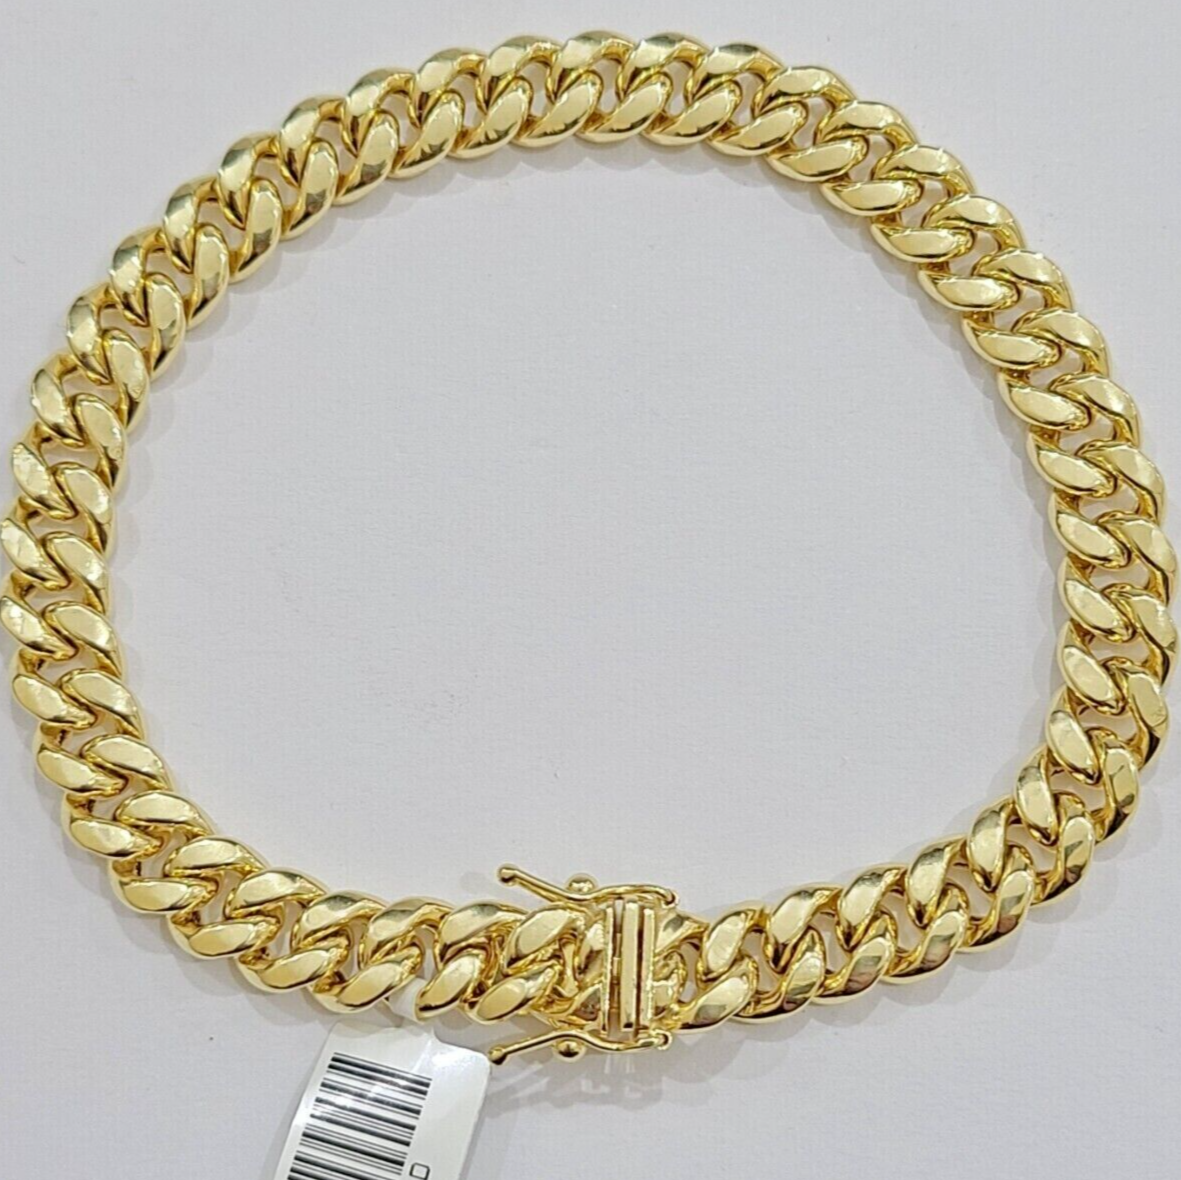 Real 10k Gold Bracelet 9 inch 8mm Miami Cuban Link Box Clasp Strong 10kt , Men's